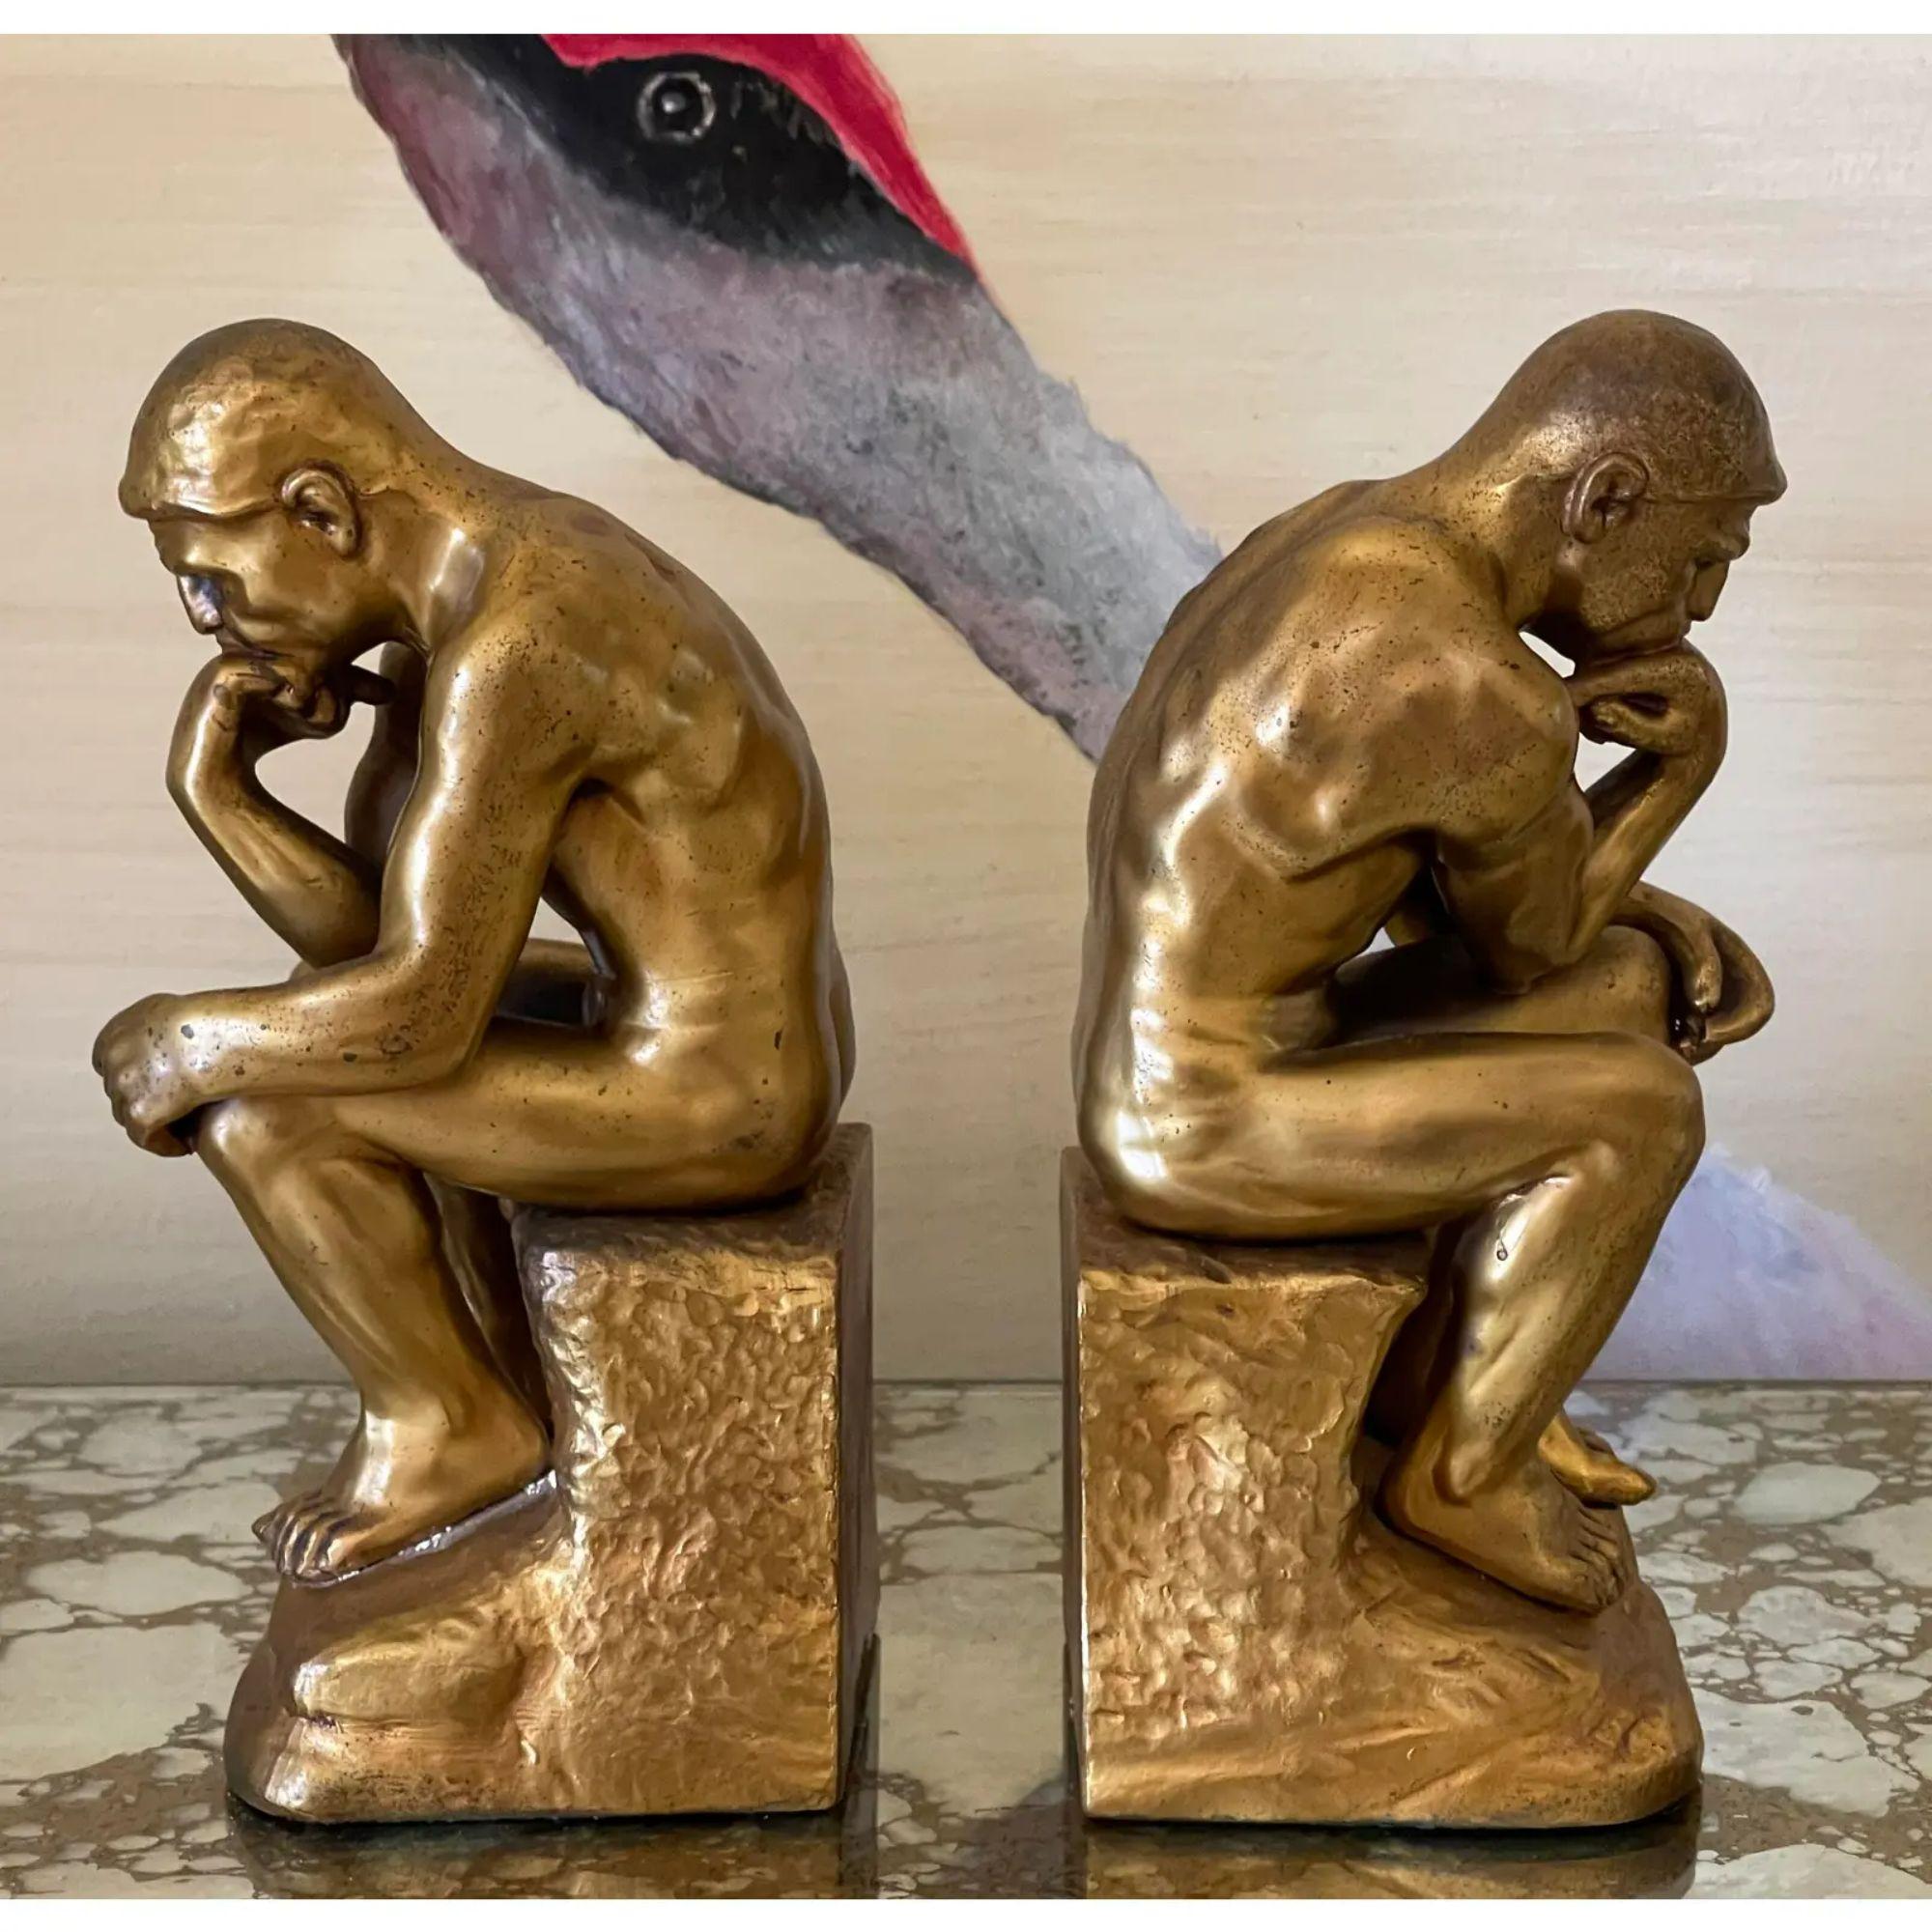 20th Century Pair of Antique Male Nude Figural Bookends - the Thinker, 1910s